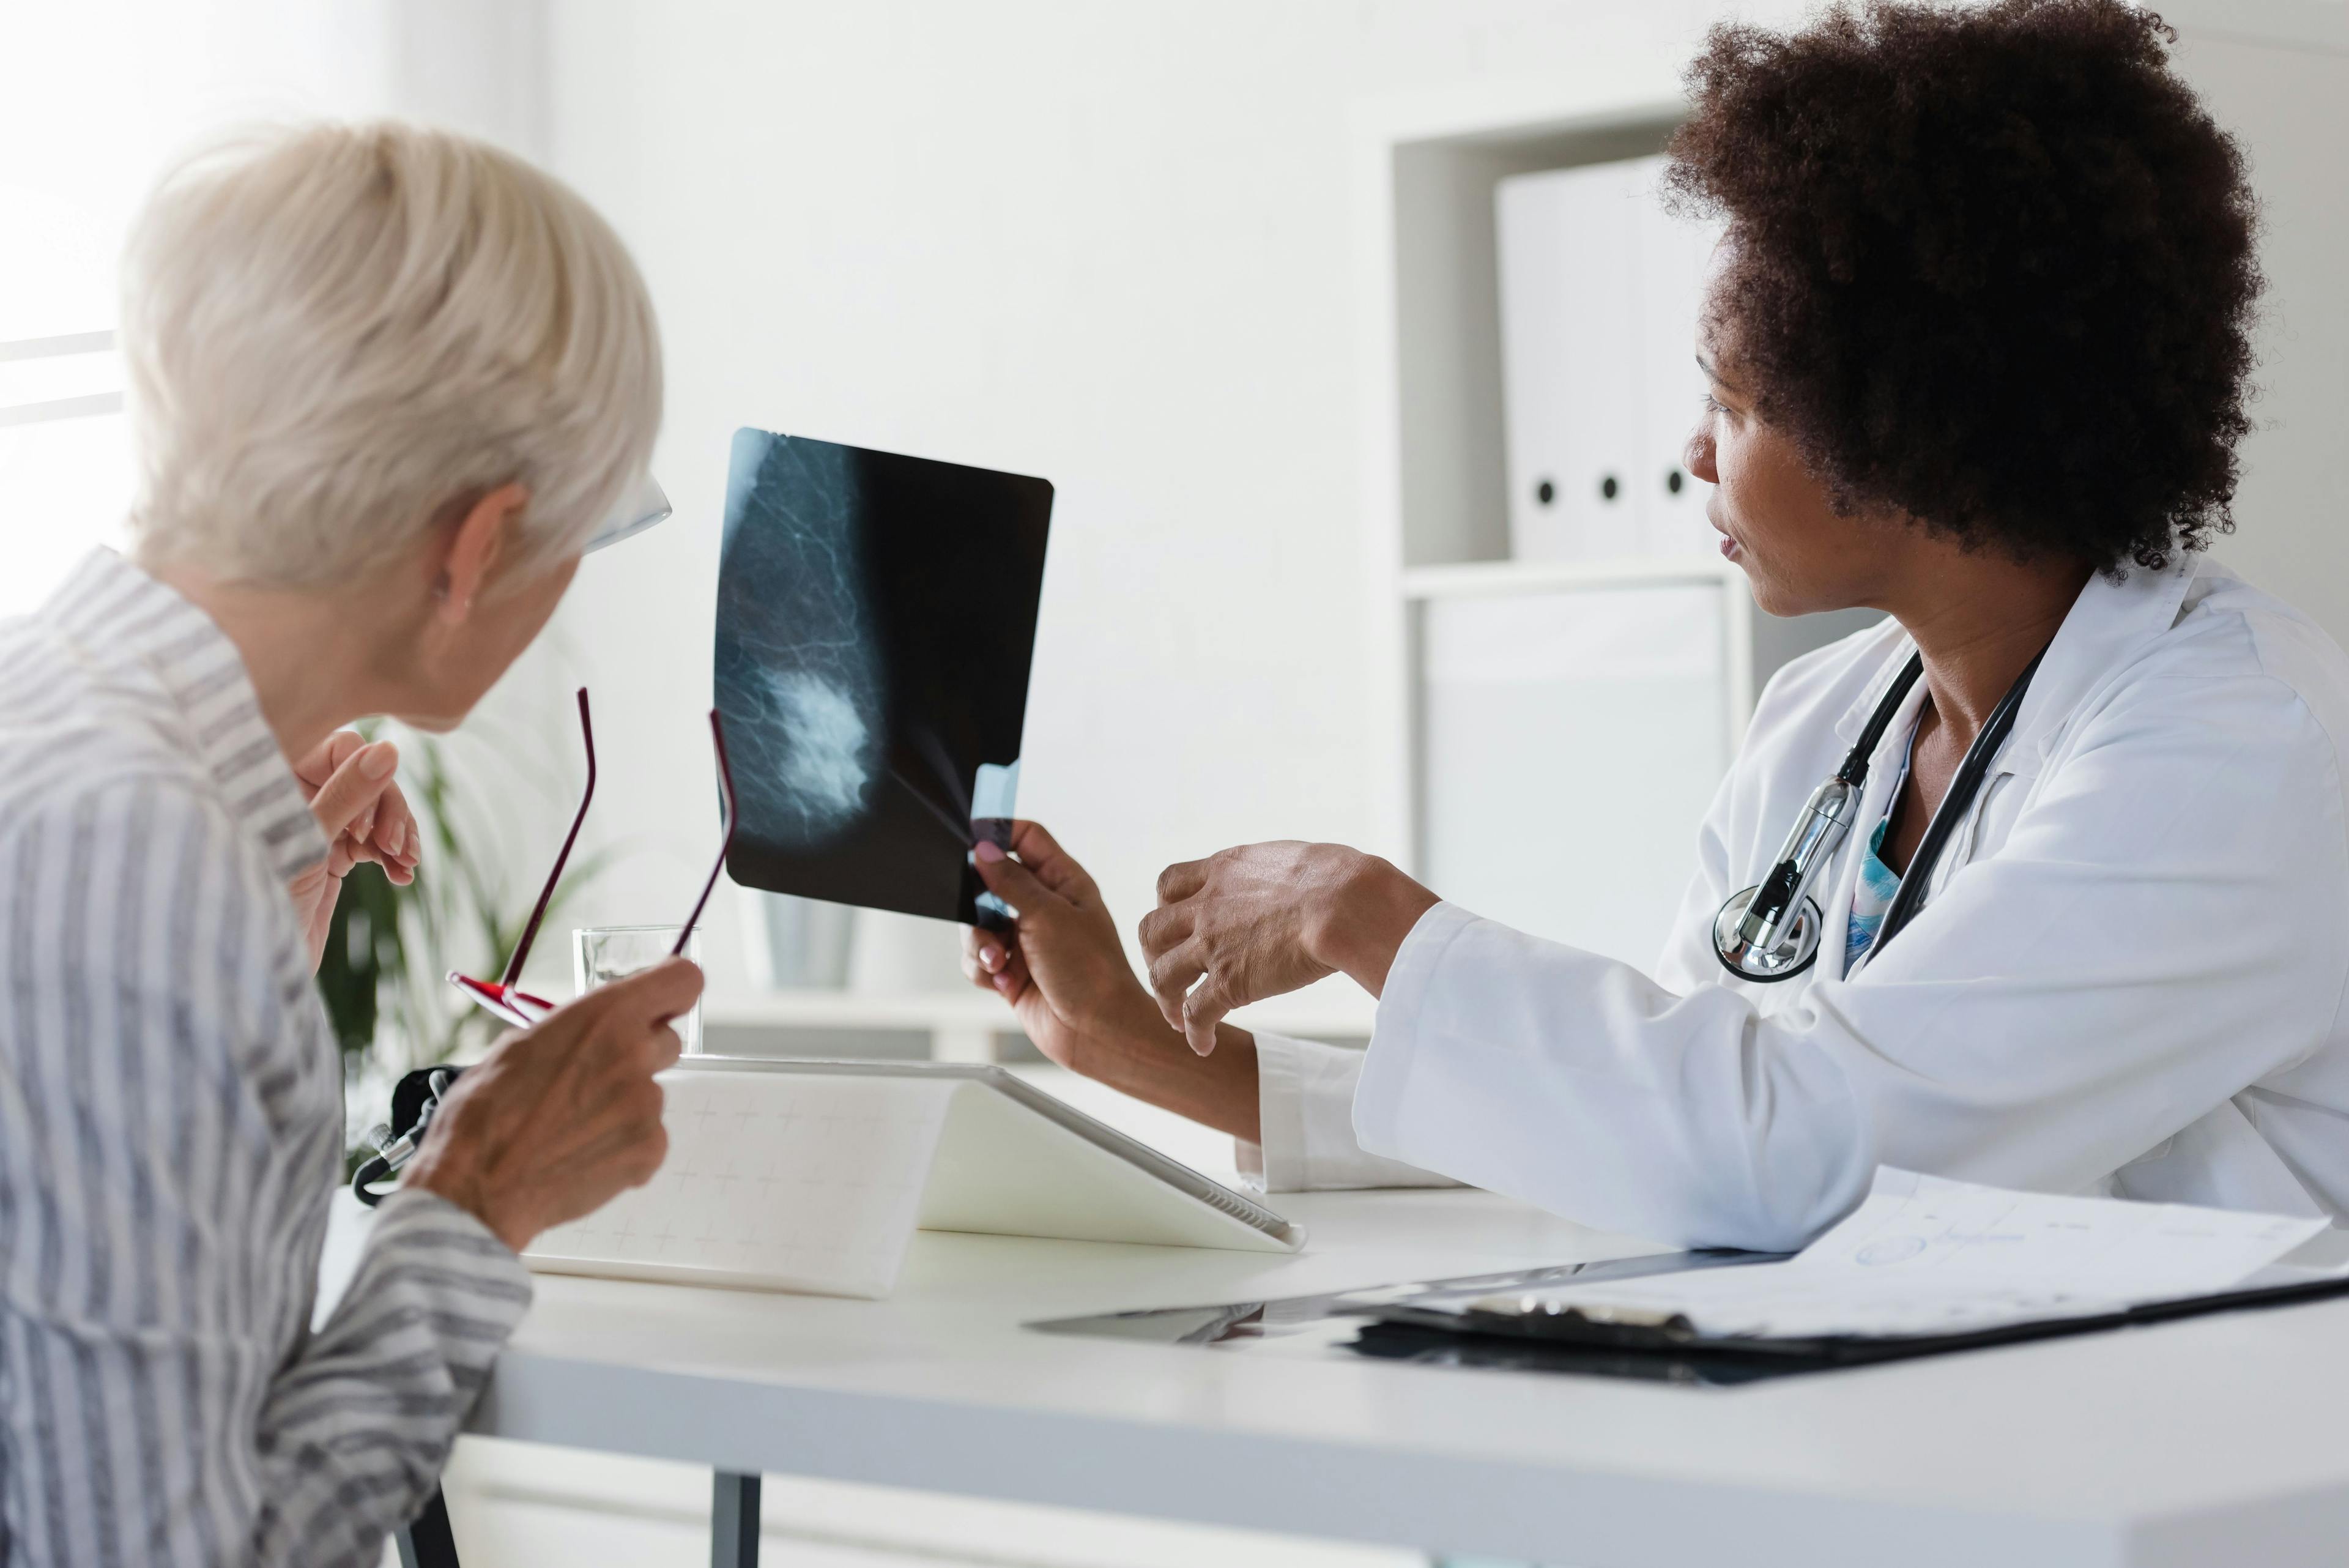 A female doctor sits at her desk and talks to a female patient while looking at her mammogram | Image Credit: lordn - stock.adobe.com